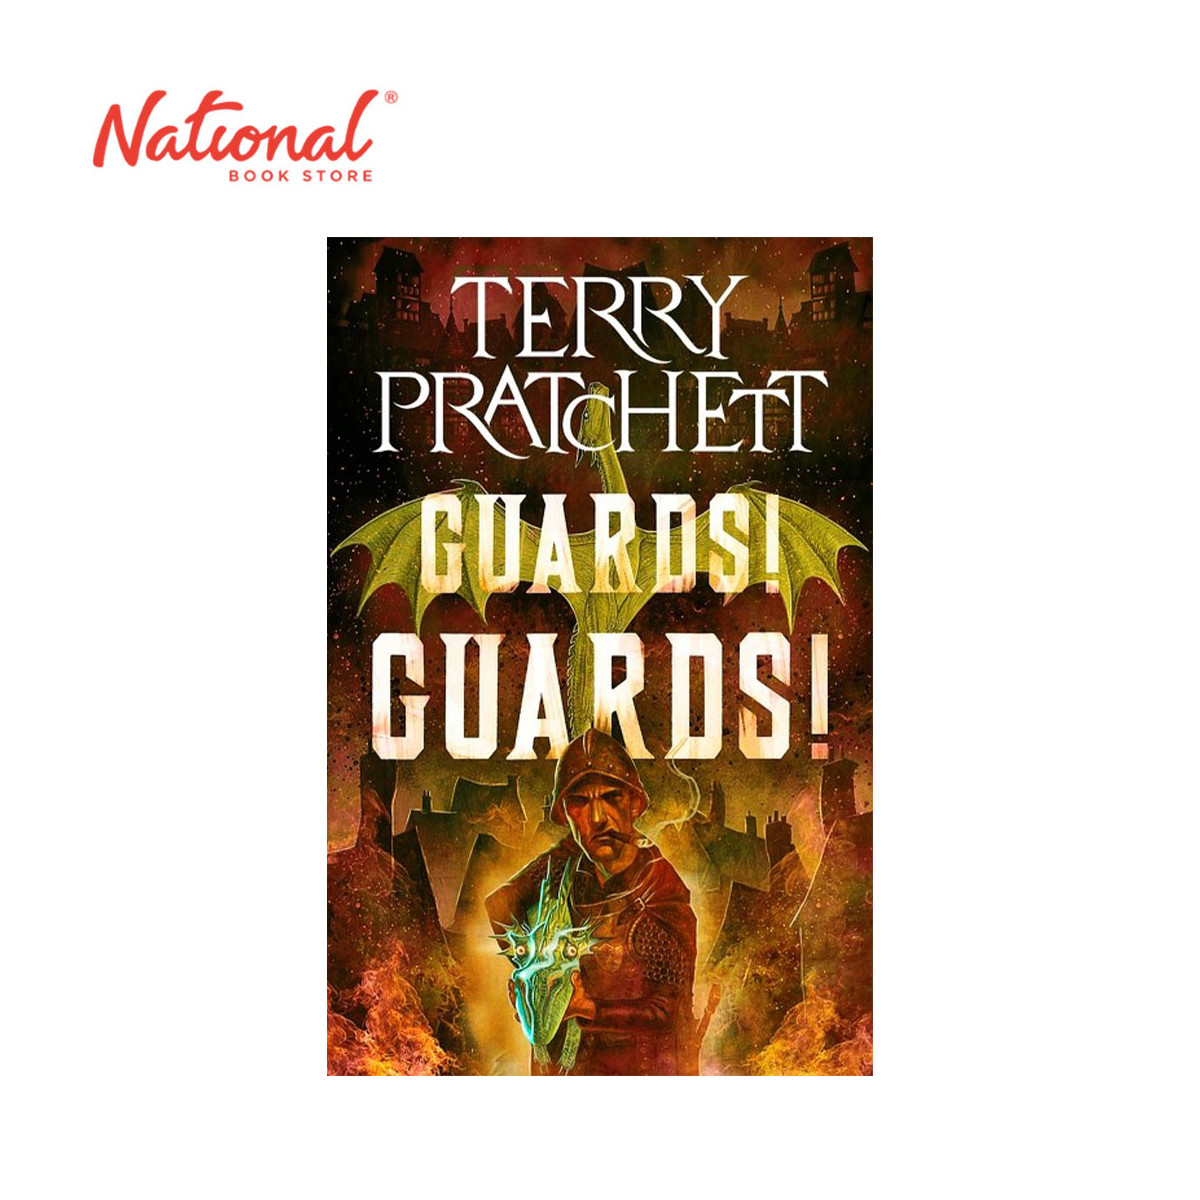 *PRE-ORDER* Guards! Guards! by Terry Pratchett - Trade Paperback - Sci-Fi, Fantasy & Horror